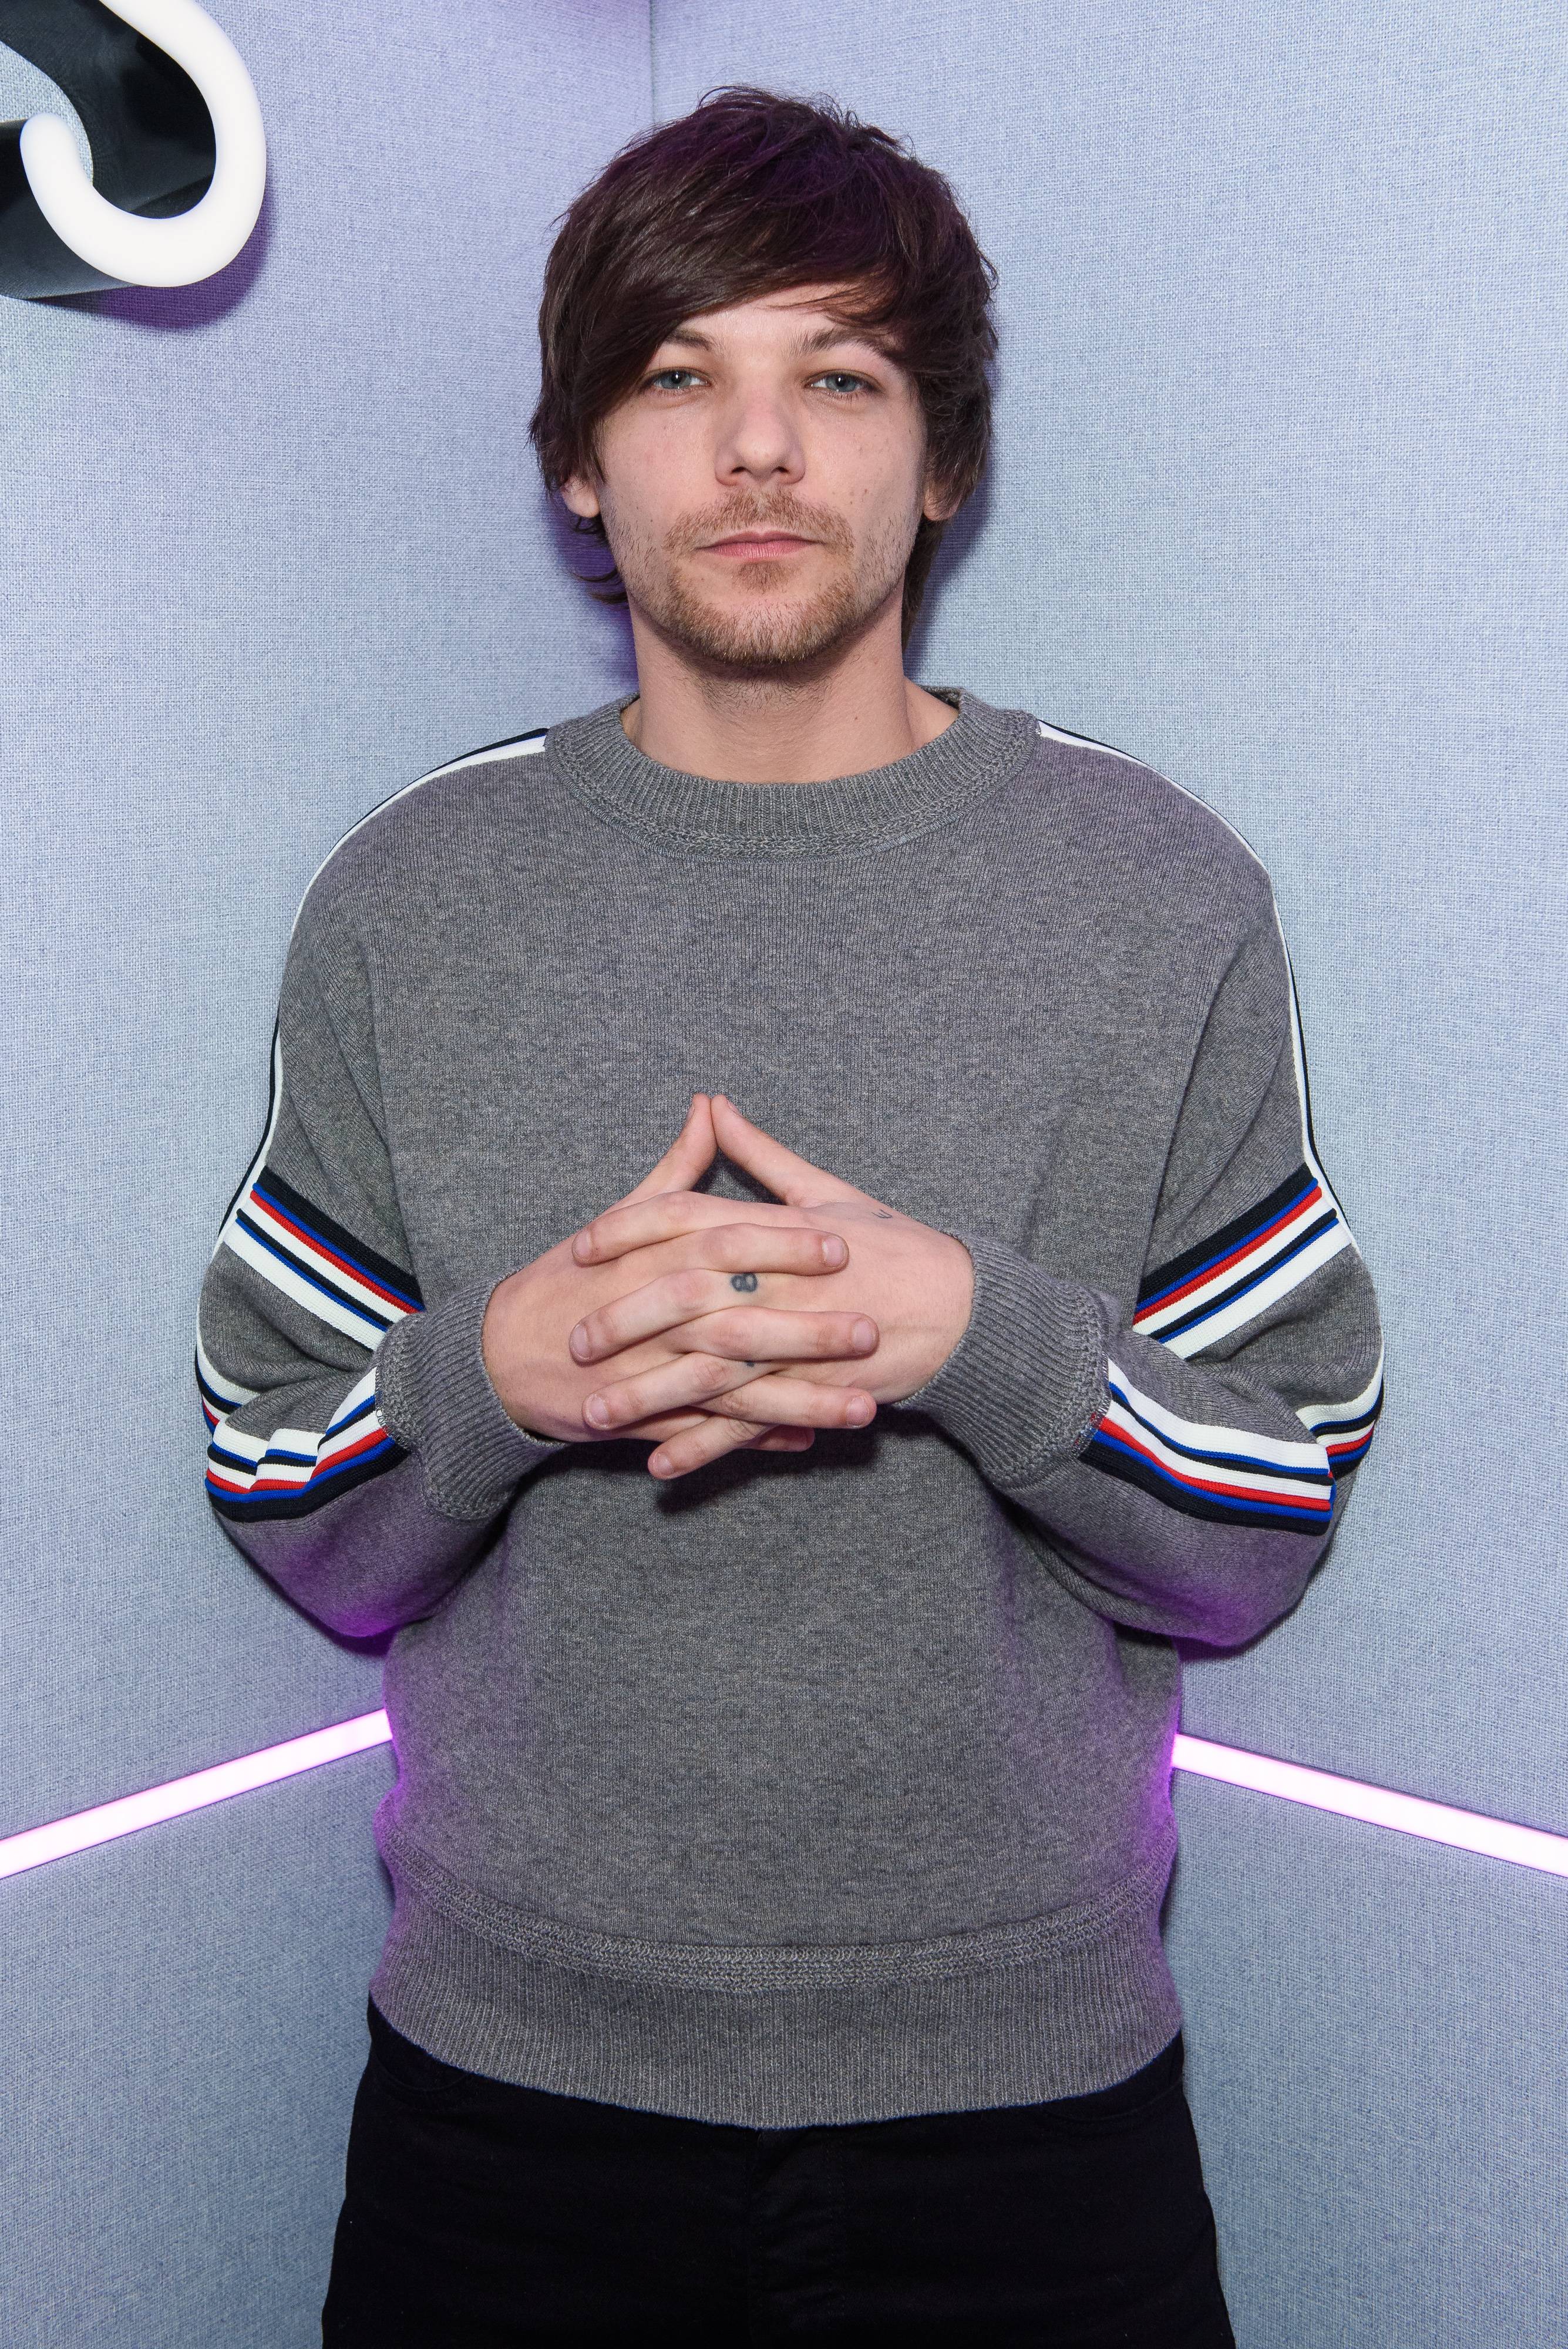 Watch the emotional music video for Louis Tomlinson's Two of Us